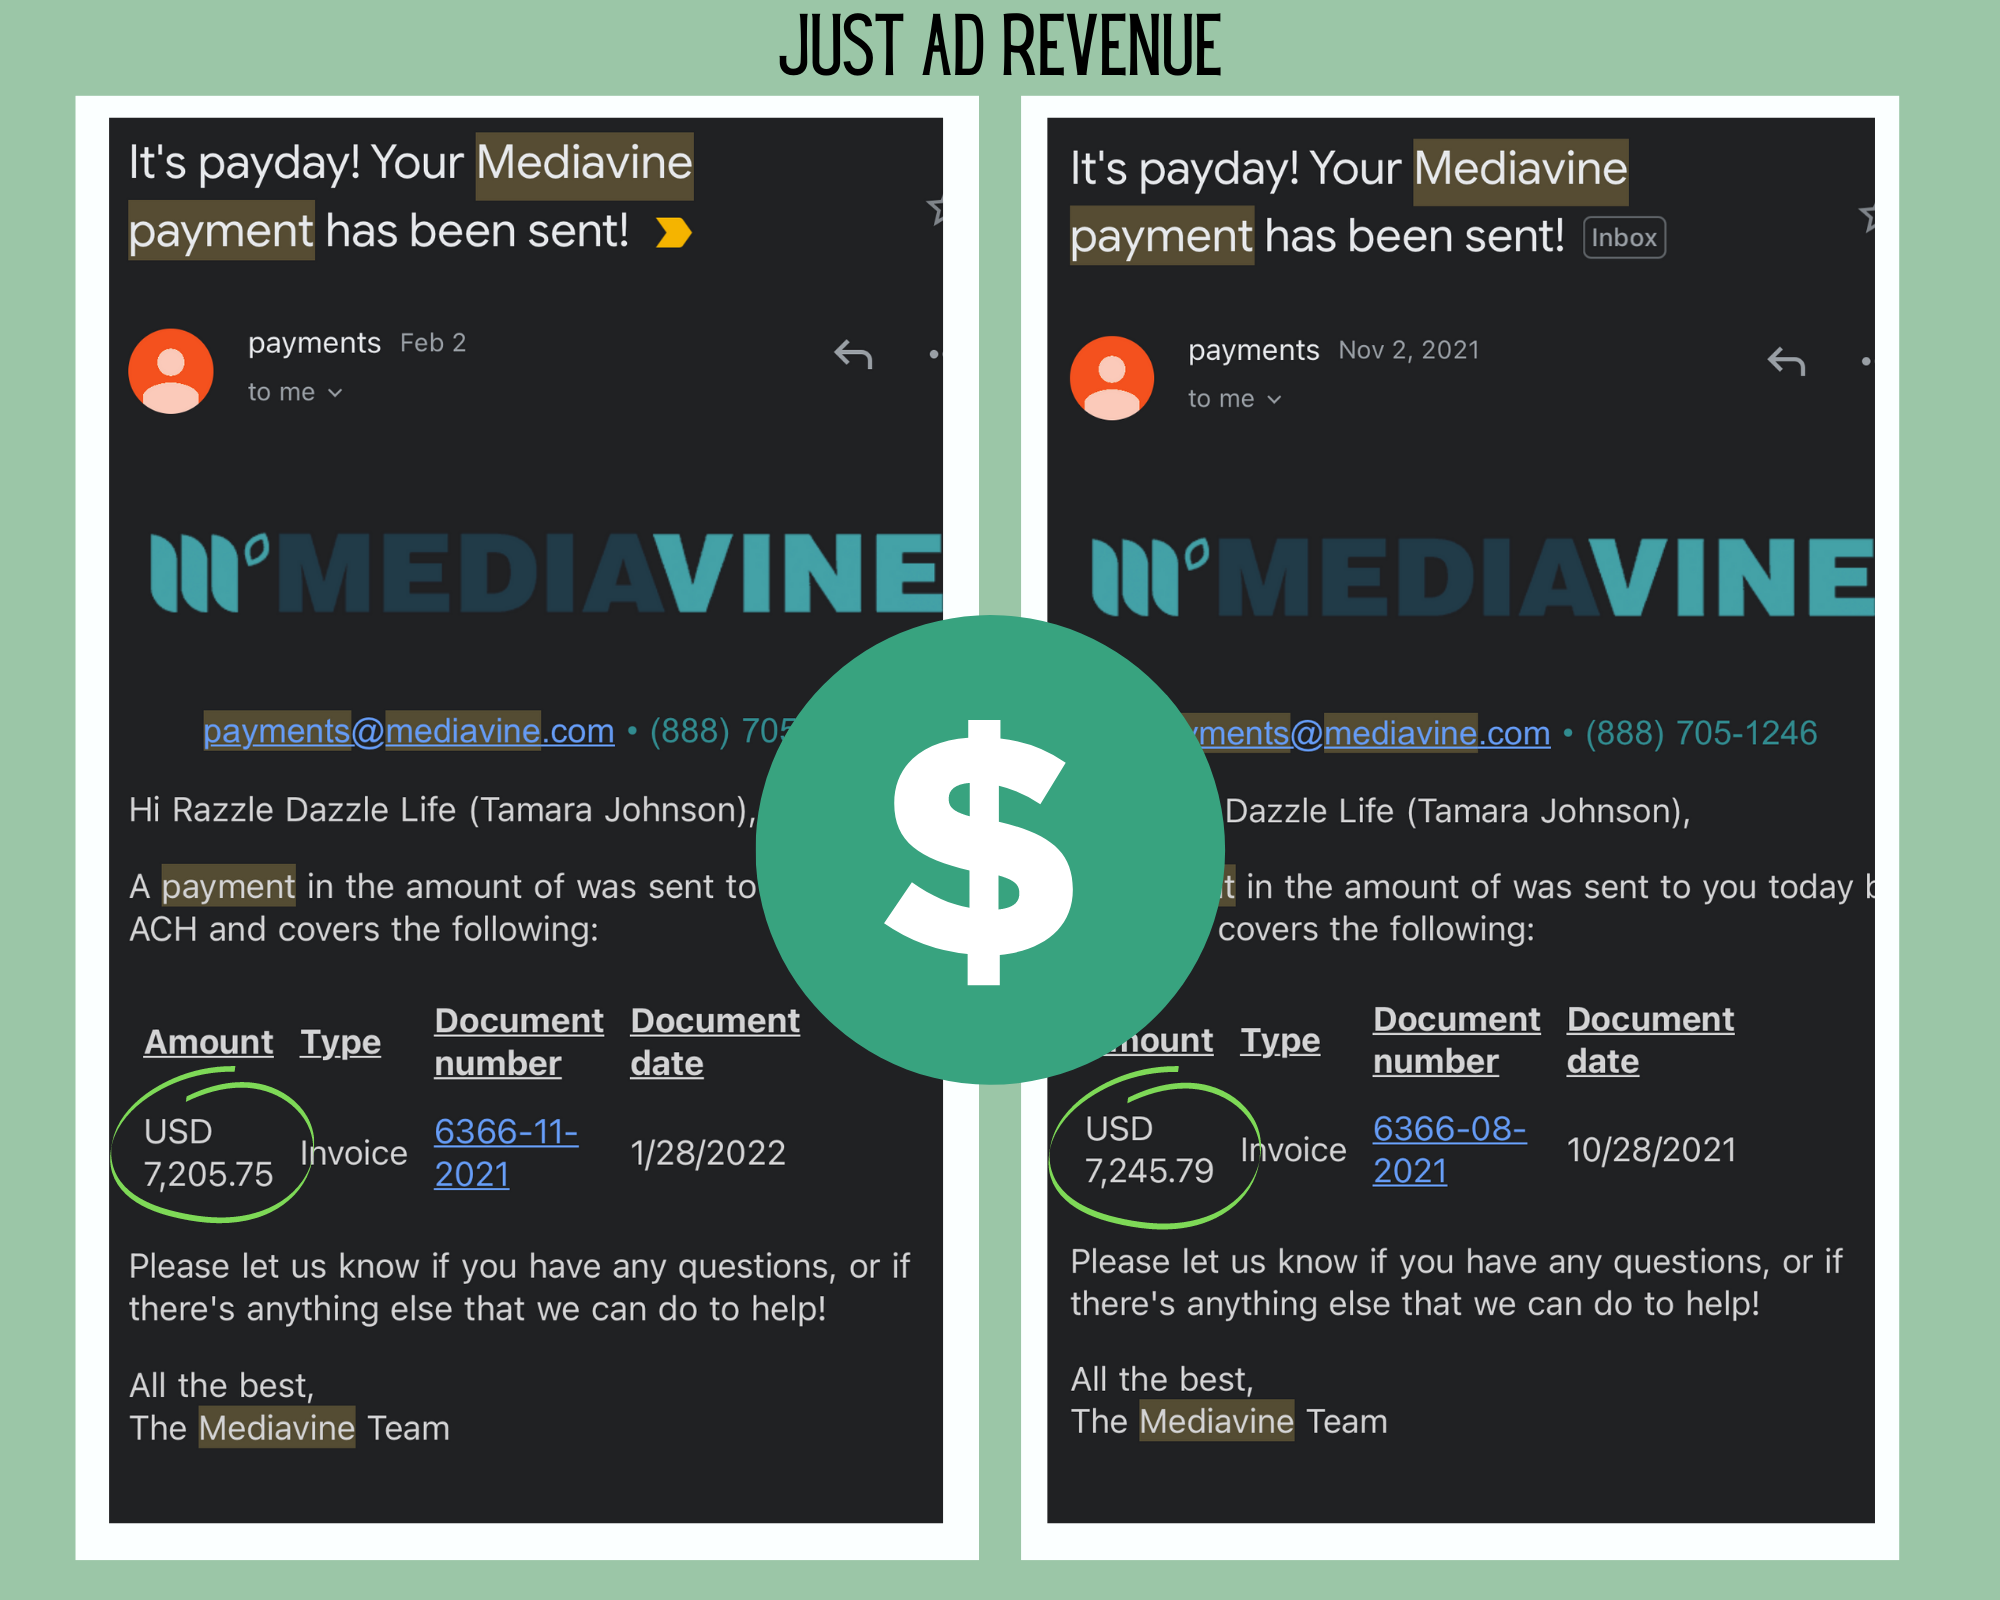 showing ad revenue from Mediavine. $7,205 in February 2022, and $7245 in November 2021